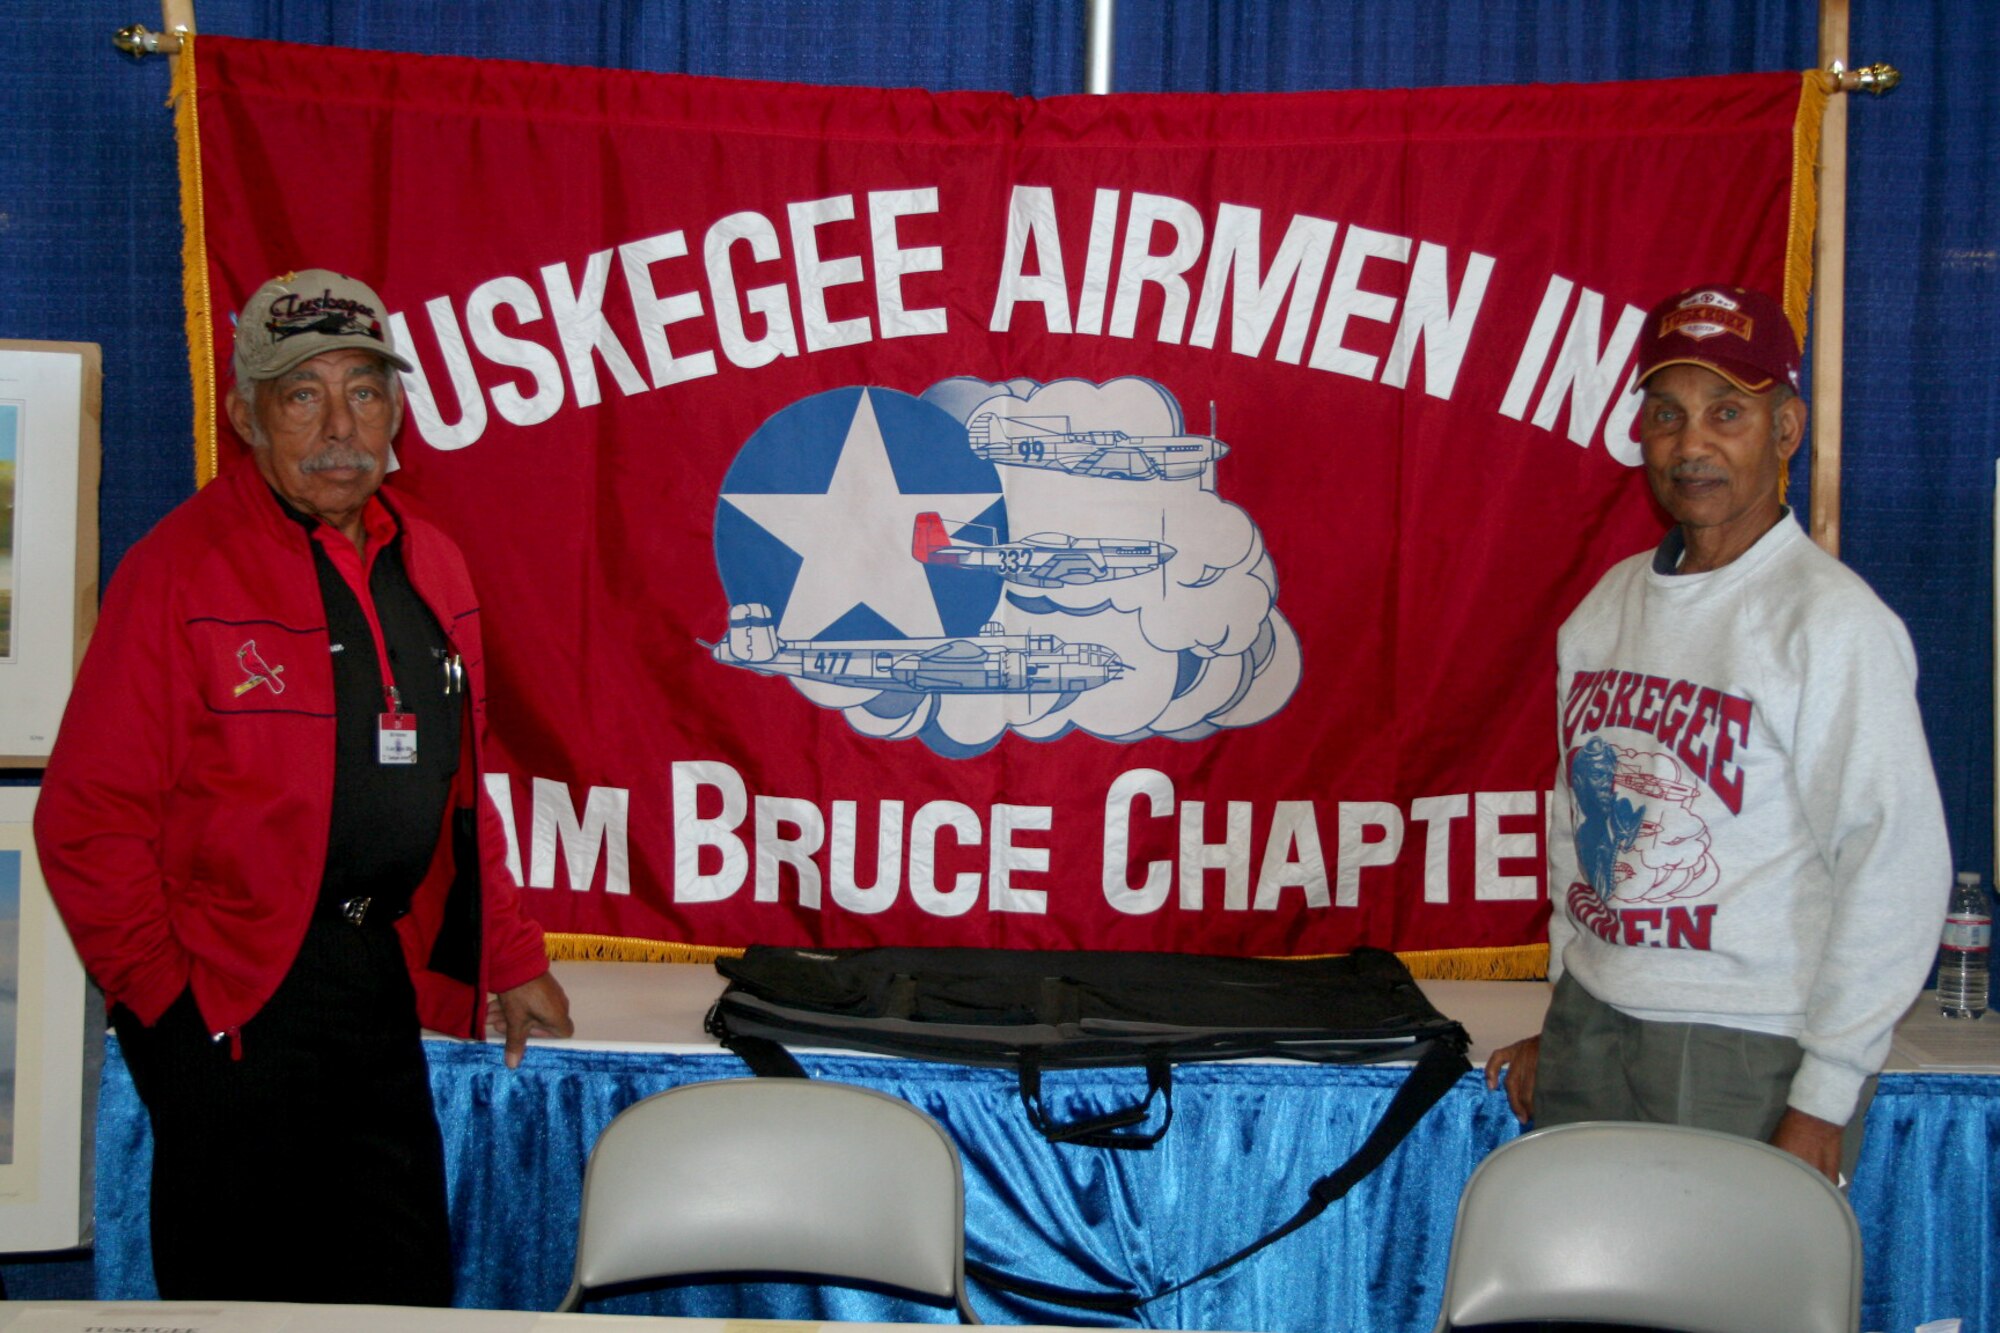 MCCHORD AIR FORCE BASE, Wash. – Tuskegee Airmen retired Lt. Cols. Bill Hammond and Ed Drummond visit Air Mobility RODEO 2009 during the opening ceremony and Wednesday. They were excited to see how far the Air Force has come. (U.S. Air Force photo/Airman 1st Class Amber Kelly-Herard)